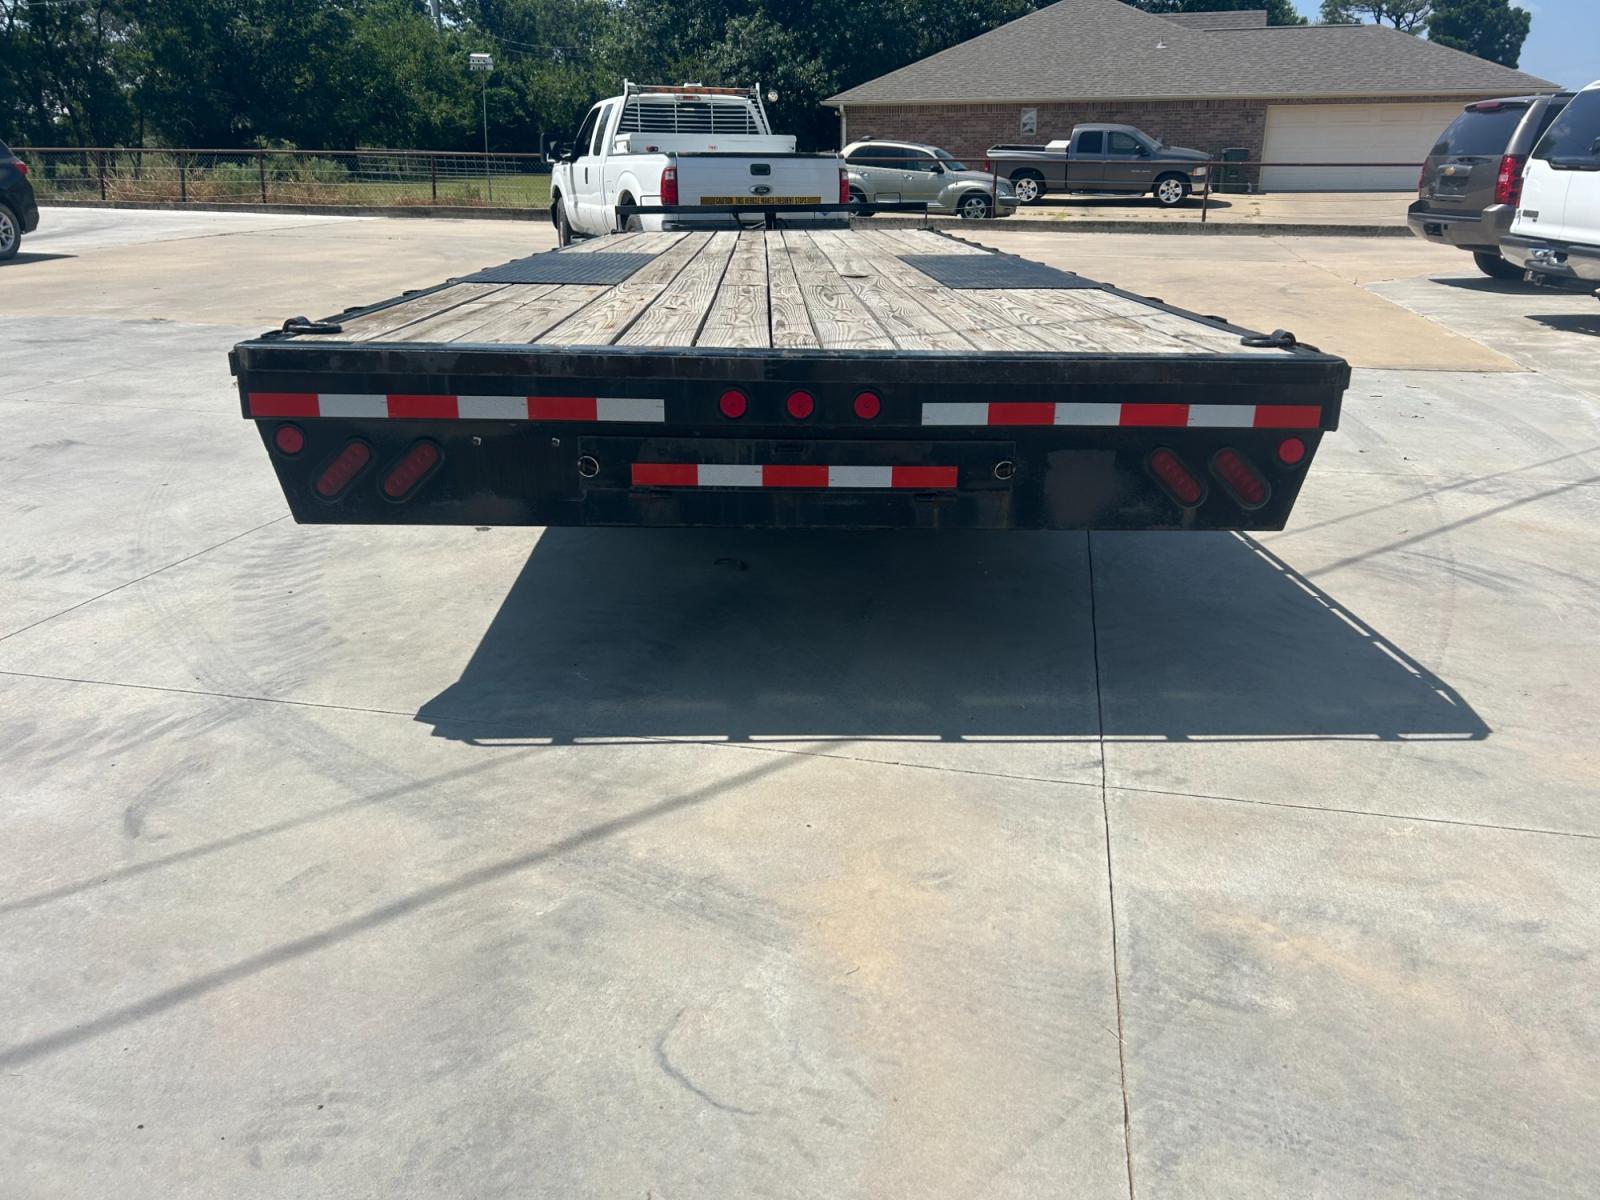 2022 BLACK Norstar Trailers IRONBULL (50HFP2426N1) , located at 17760 Hwy 62, Morris, OK, 74445, 35.609104, -95.877060 - 2022 IRONBULL TRAILER FEATURES 10" I-BEAM FRAME AND TONGUE, 2 5/16'' ADJUSTABLE COUPLER, 3'' STRUCTURAL CROSSMEMBERS, DECK HEIGHT 33'', RUB RAIL, STAKE POCKETS, PIPE SPOOLS, CAMBERED SPRING AXLES, MULTI-LEAF SLIPPER SPRING SUSPENSION, E-Z LUBE HUBS, 2 ELECTRIC BREAK AXLES, FULL 93' WIDE DECKOVER, 8 - Photo #3